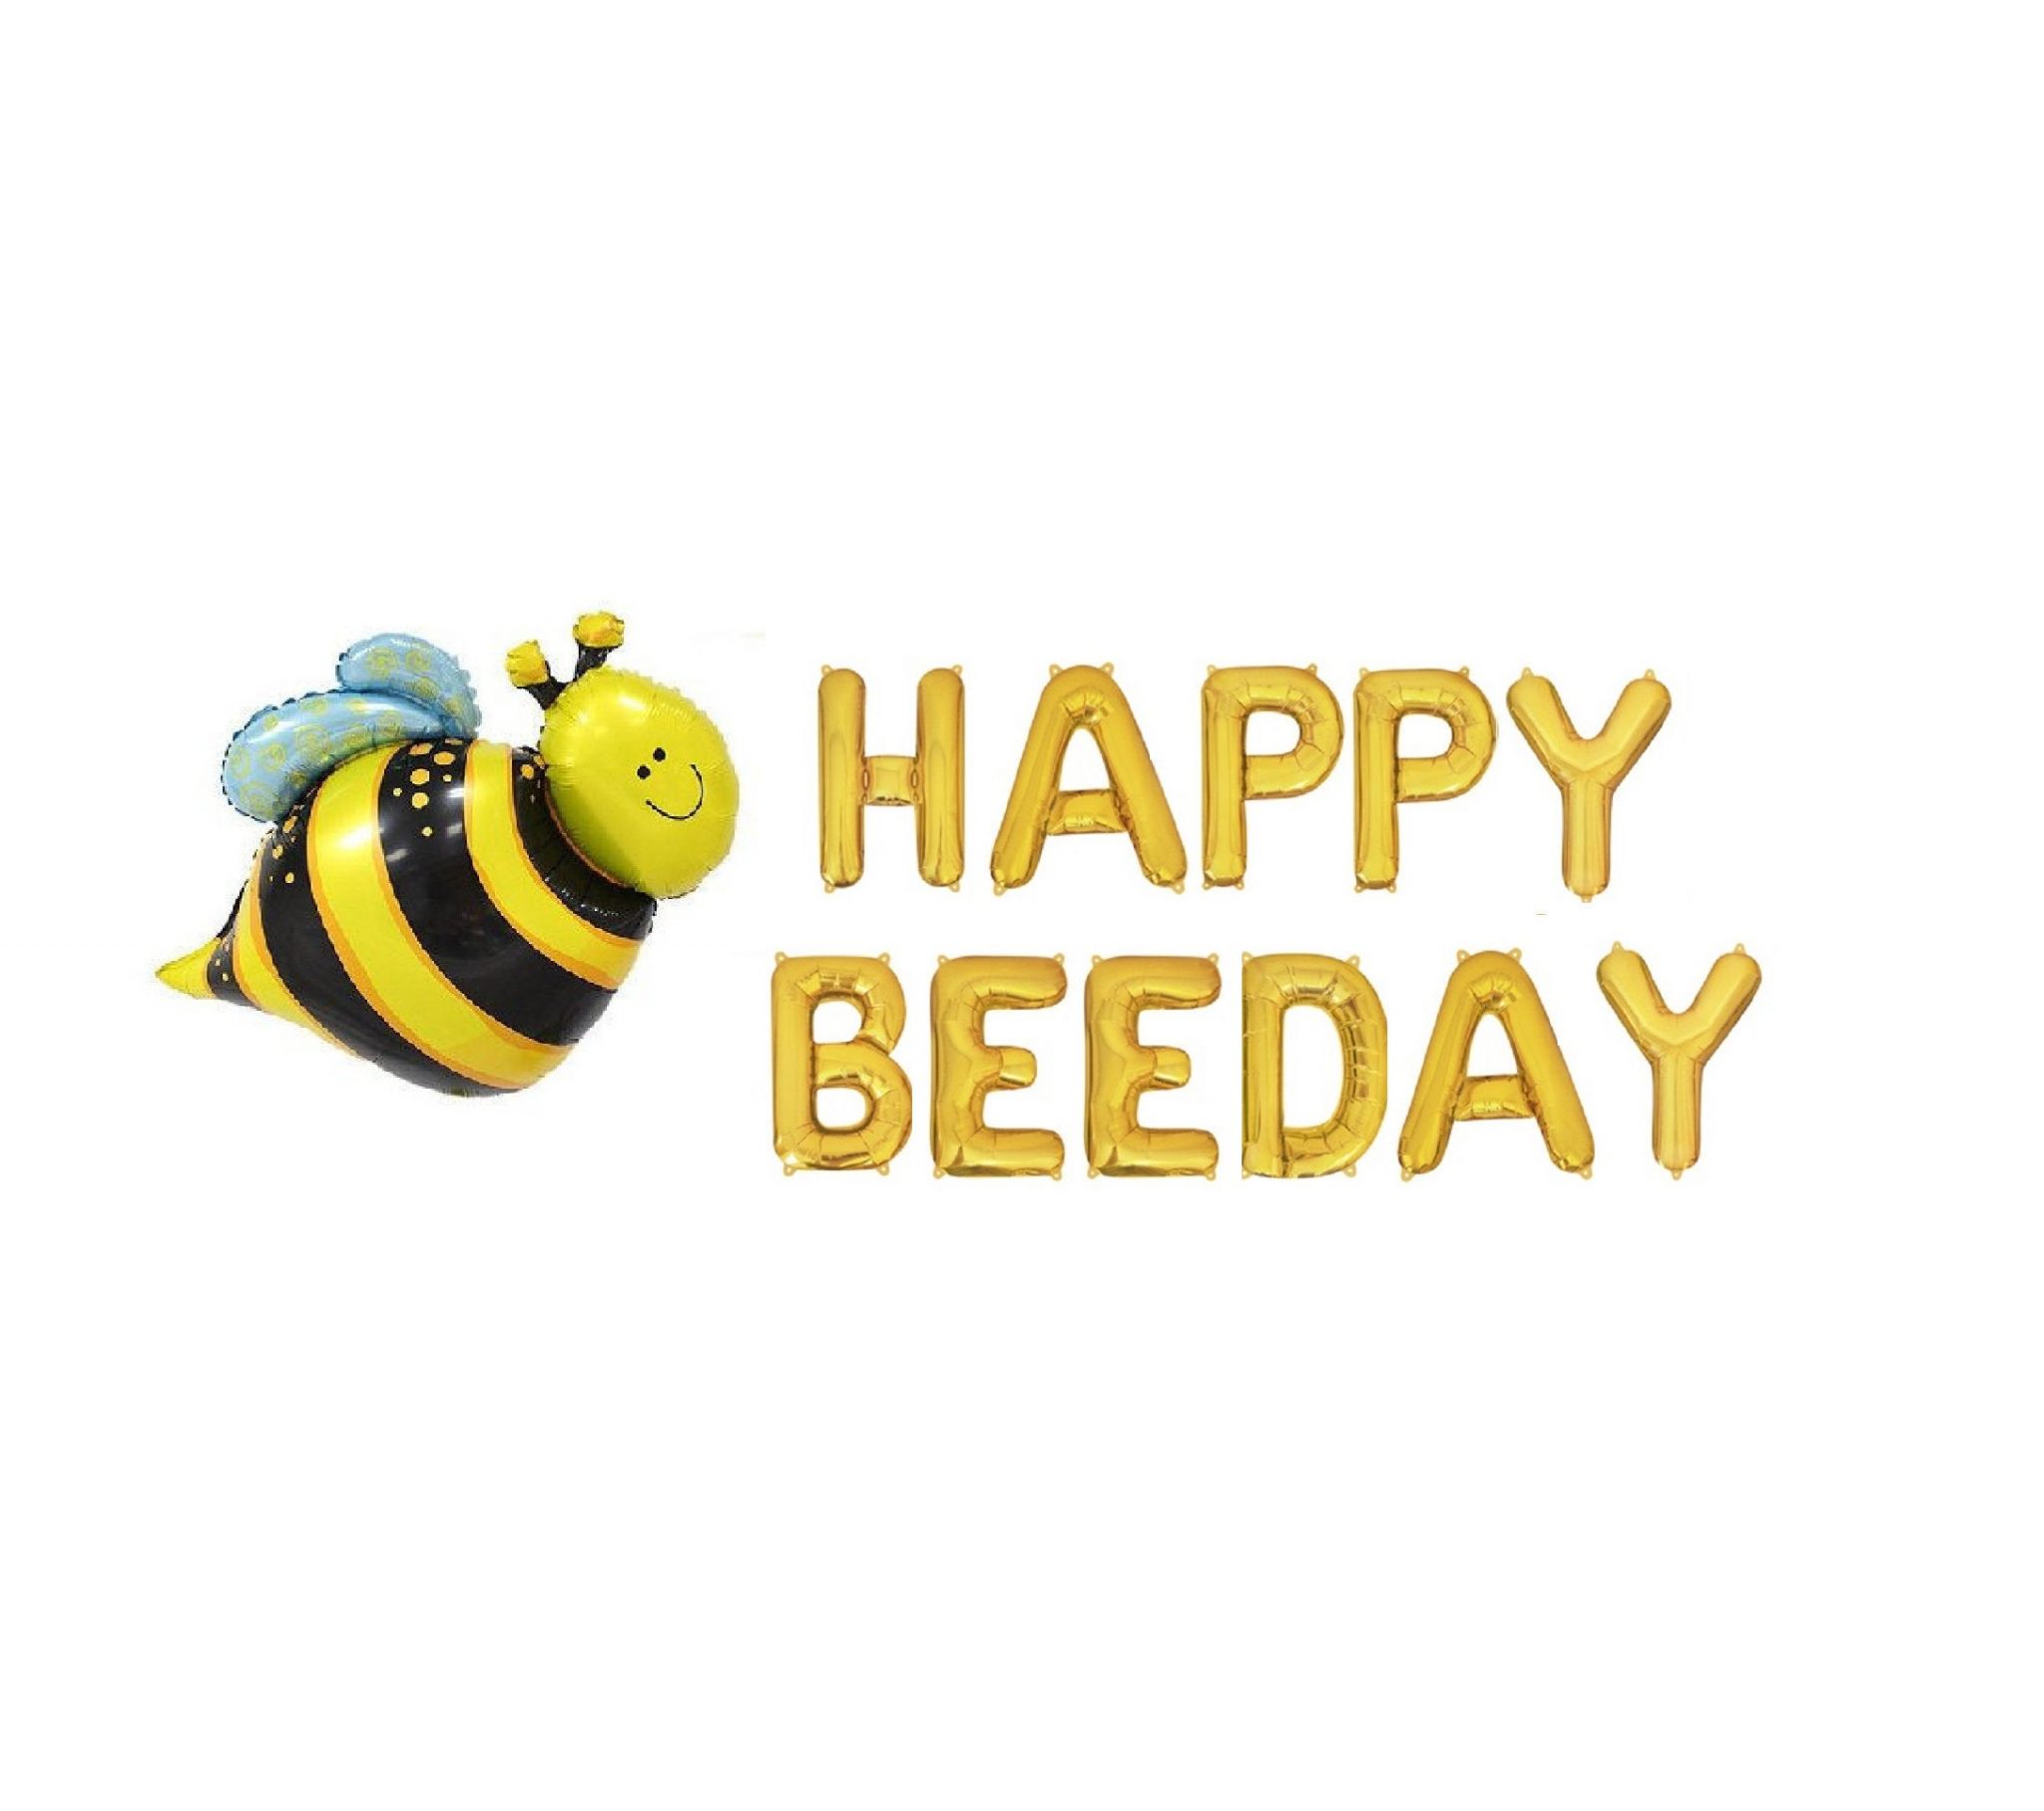 World Honey Bee Day 2019 Save the Bees! eVero Corporation